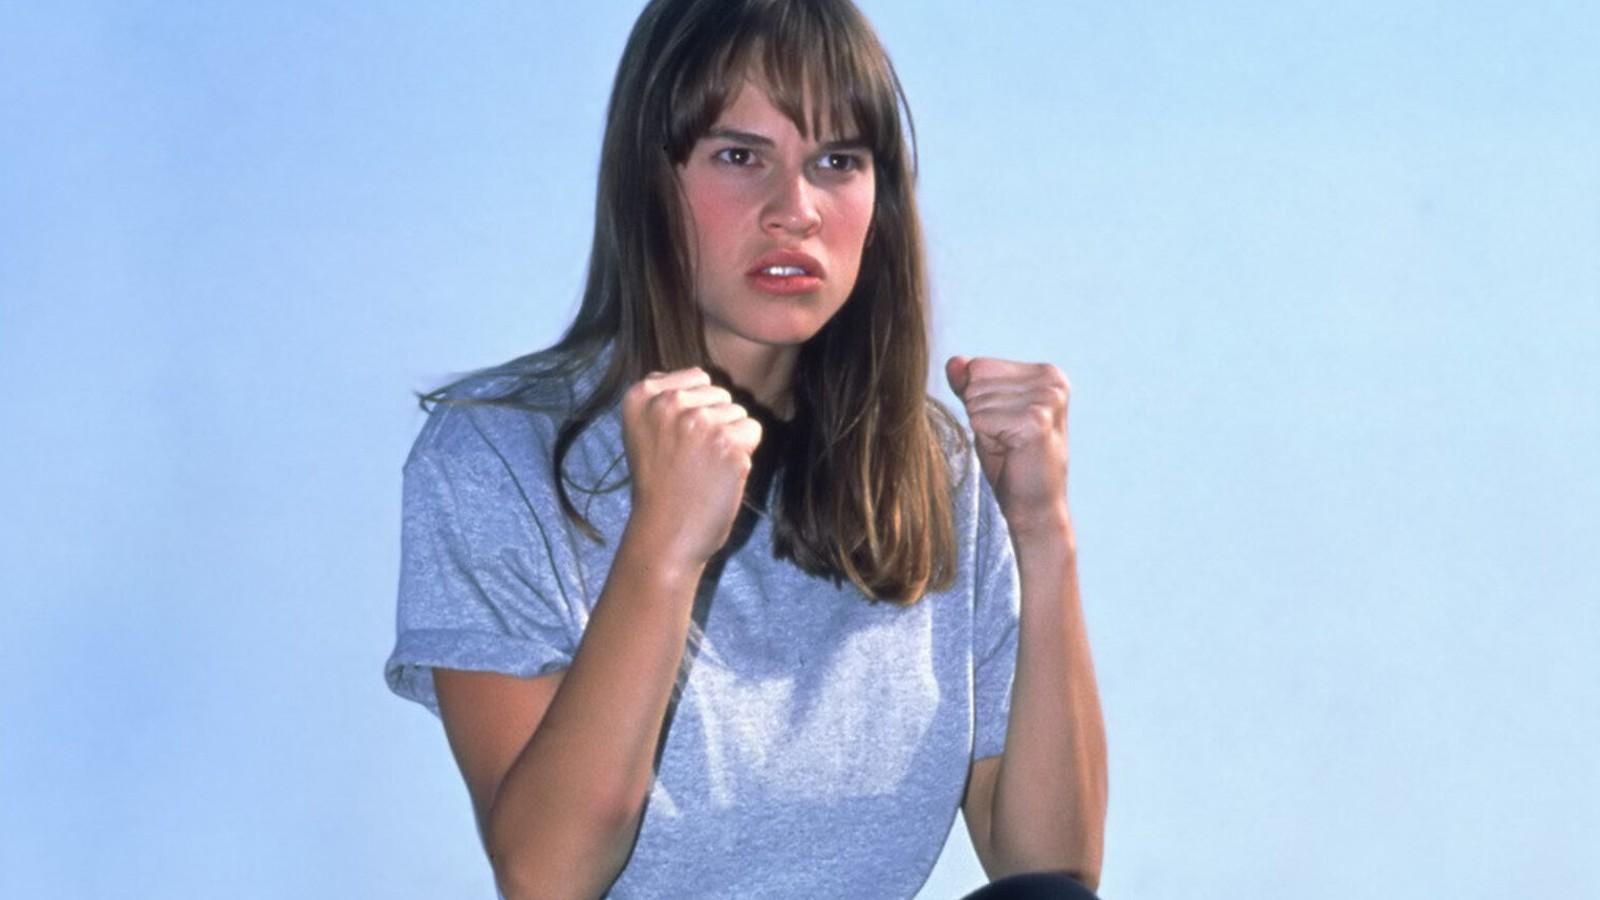 Hilary Swank with fists up ready to fight in The Next Karate Kid.